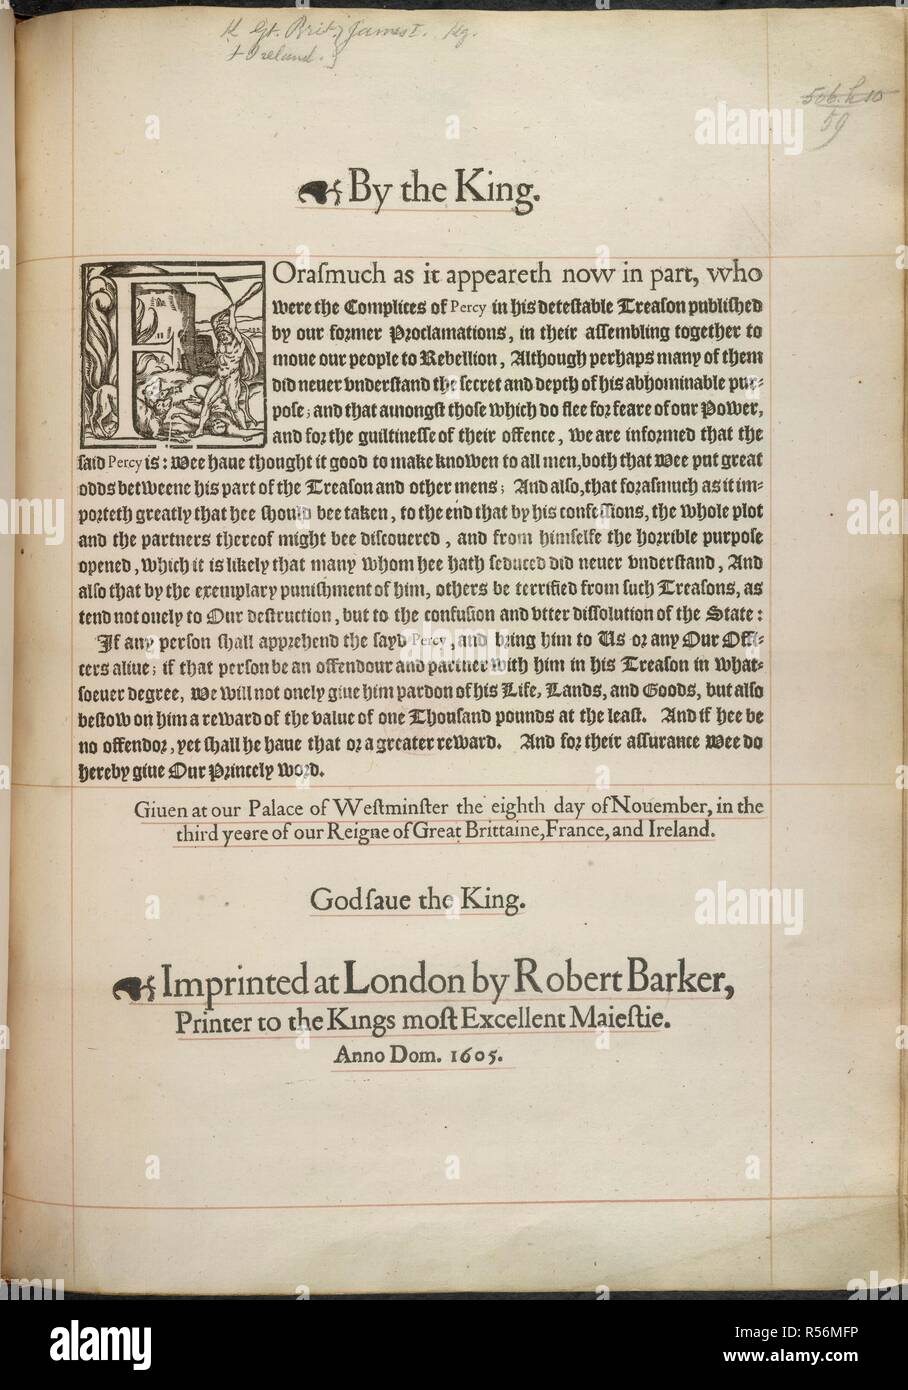 A Proclamation of 1605. By the King. [A Proclamation offering a reward of. R. Barker: London, 1605. A Proclamation offering a reward of Â£1000 for the apprehension of Thomas Percy, the Gunpowder Plot conspirator, 8 Nov. 1605.  Image taken from By the King. [A Proclamation offering a reward of Â£1000 for the apprehension of Thomas Percy. 8 Nov. 1605.]  Originally published/produced in R. Barker: London, 1605. . Source: C.112.h.1.(59),. Language: English. Stock Photo